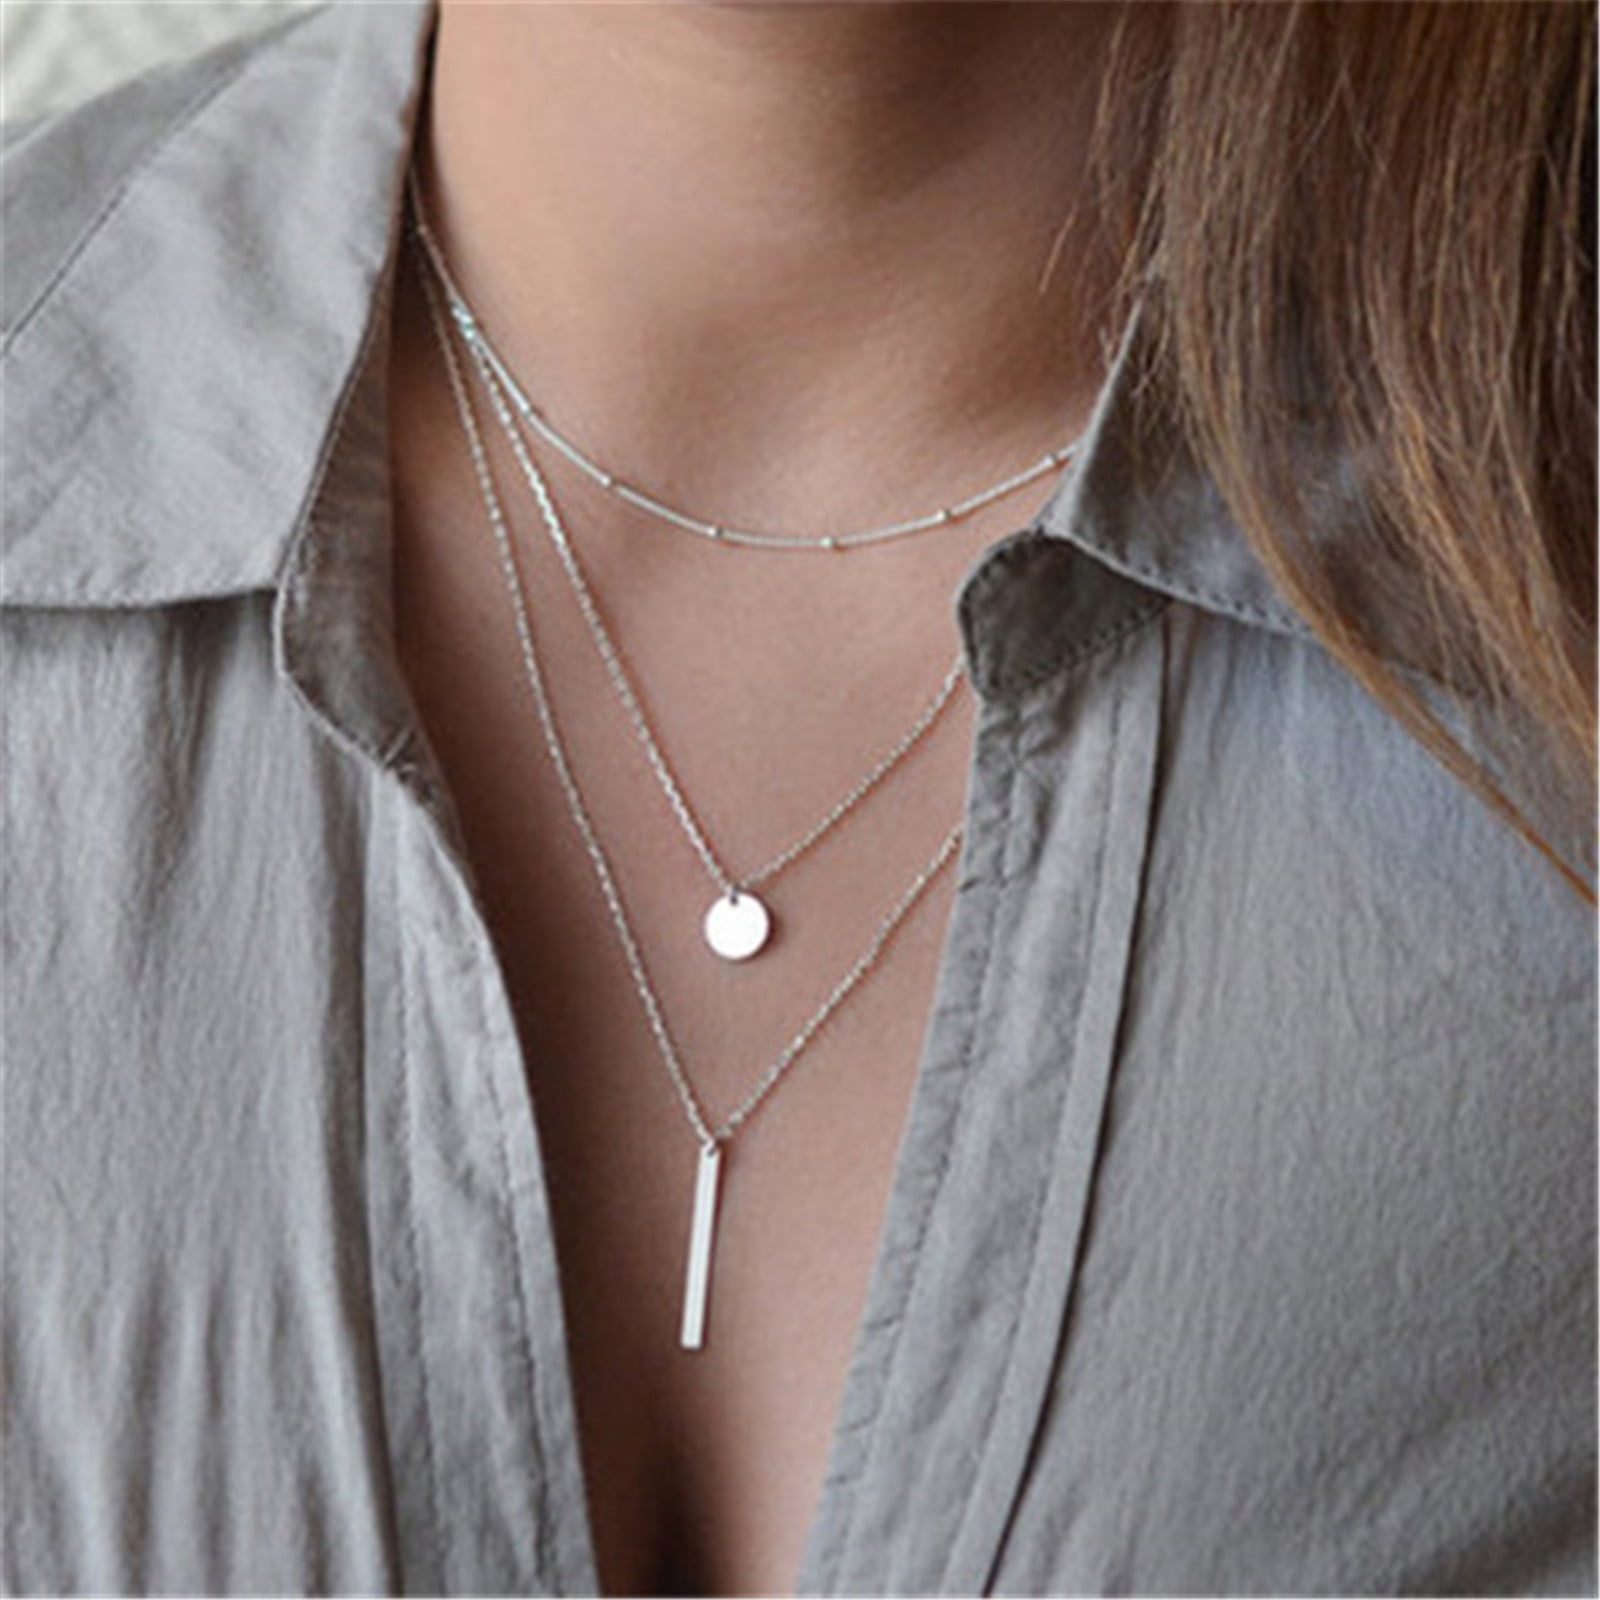 2PC Necklace Multi Layer Boho Long Necklace with Disc Bar Pendant for Women  Necklaces for Women Pearl Crystal Necklace Holder 